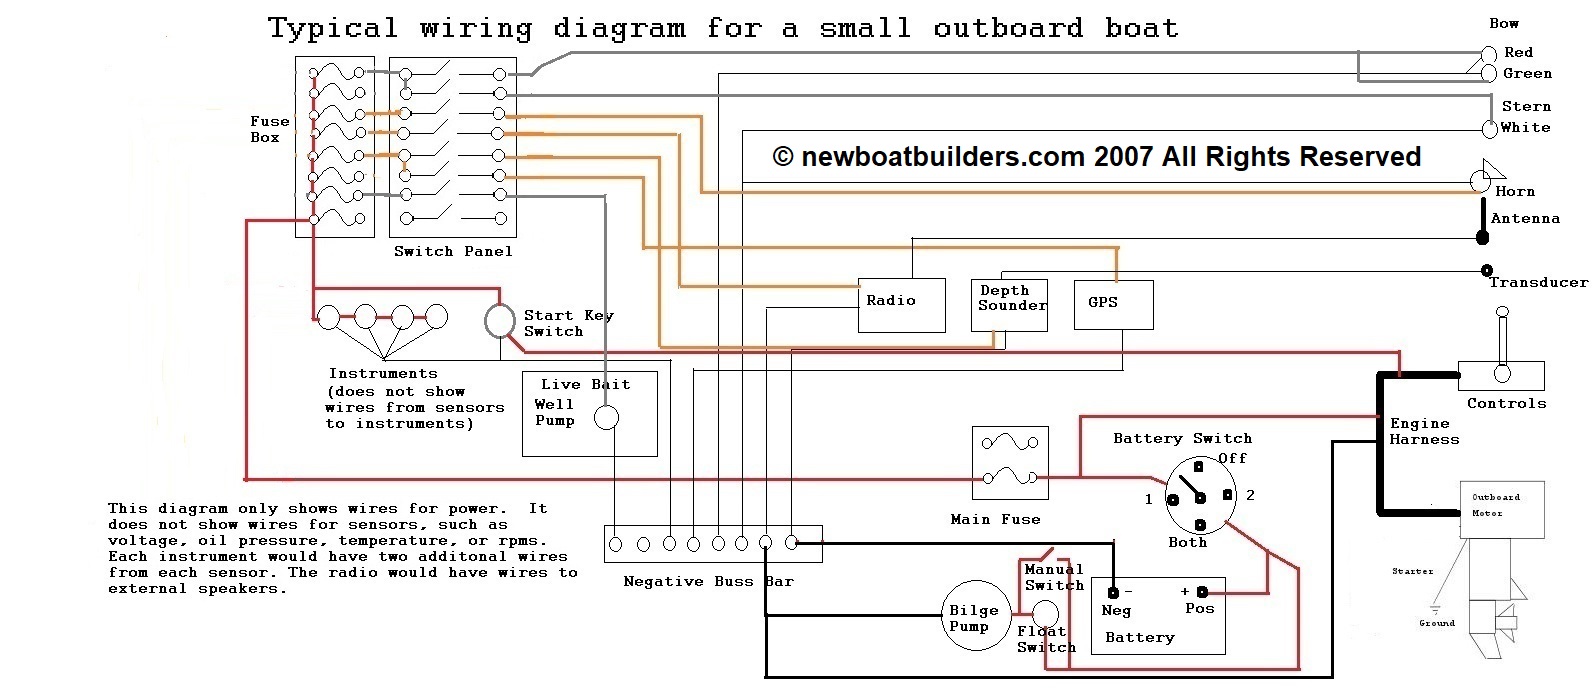 Boat Building Standards | Basic Electricity | Wiring Your Boat | Print  Friendly Page Boat Switch Panel Wiring Diagram New Boat Builders